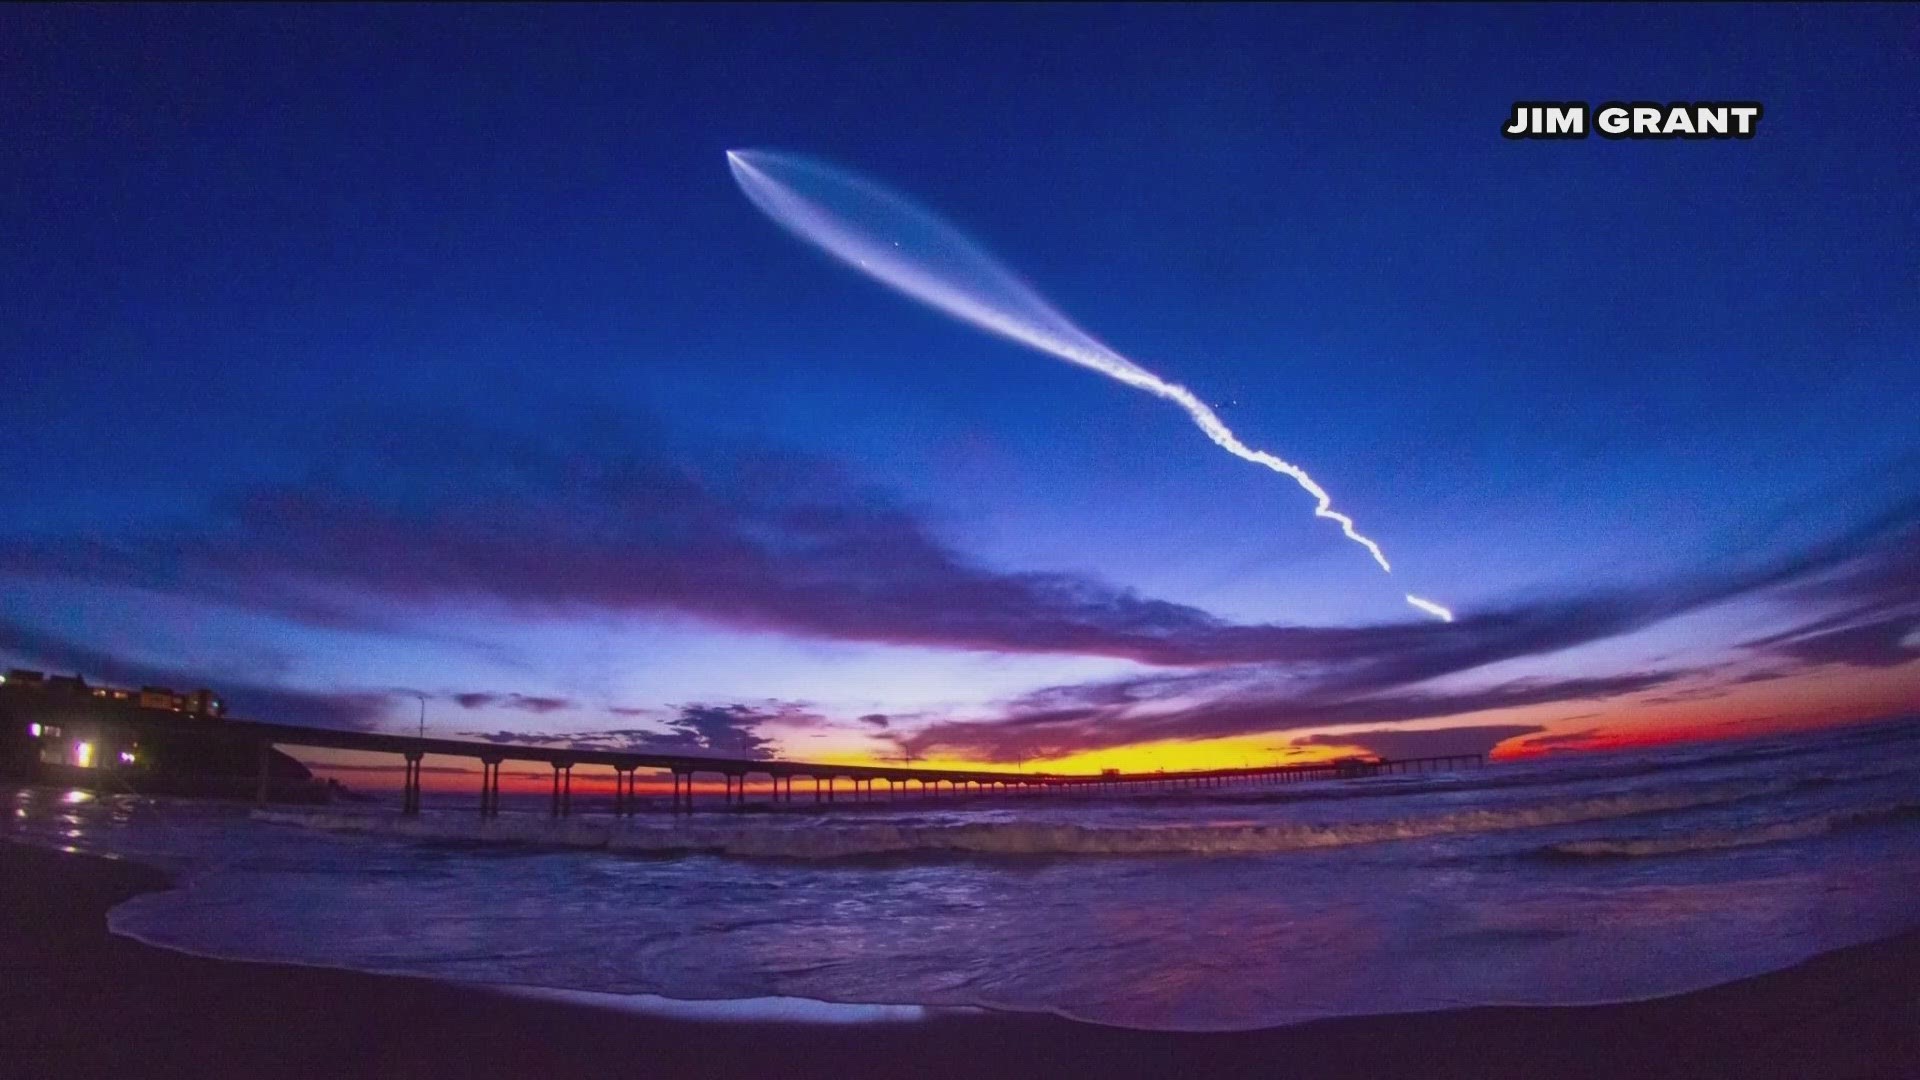 A SpaceX launch at 7:28 p.m. made its way across San Diego skies just after sunset.